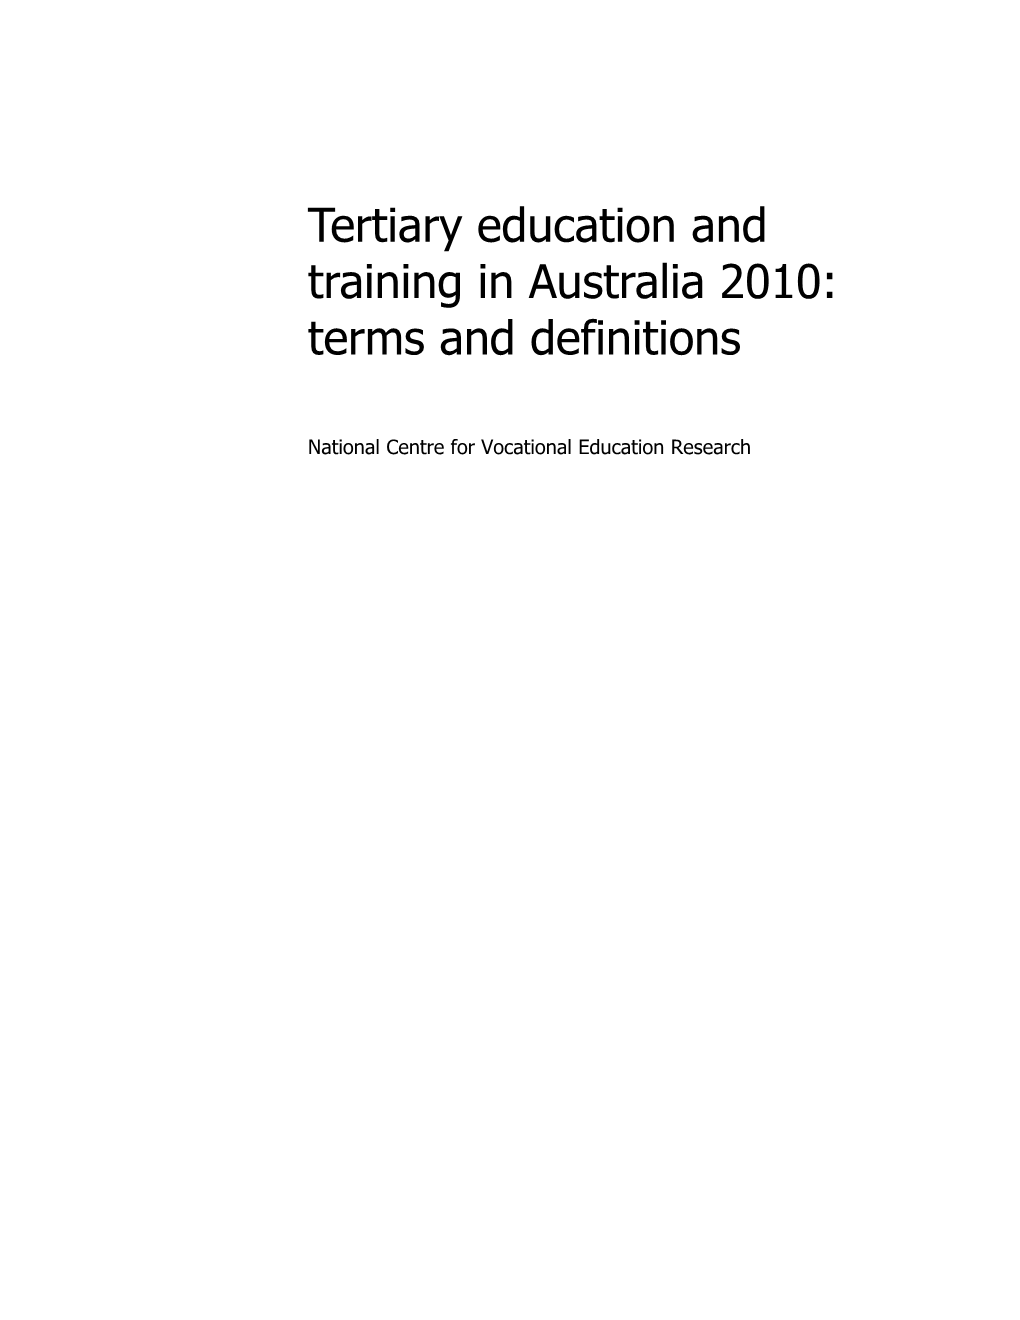 Tertiary Education and Training in Australia 2010: Terms and Definitions